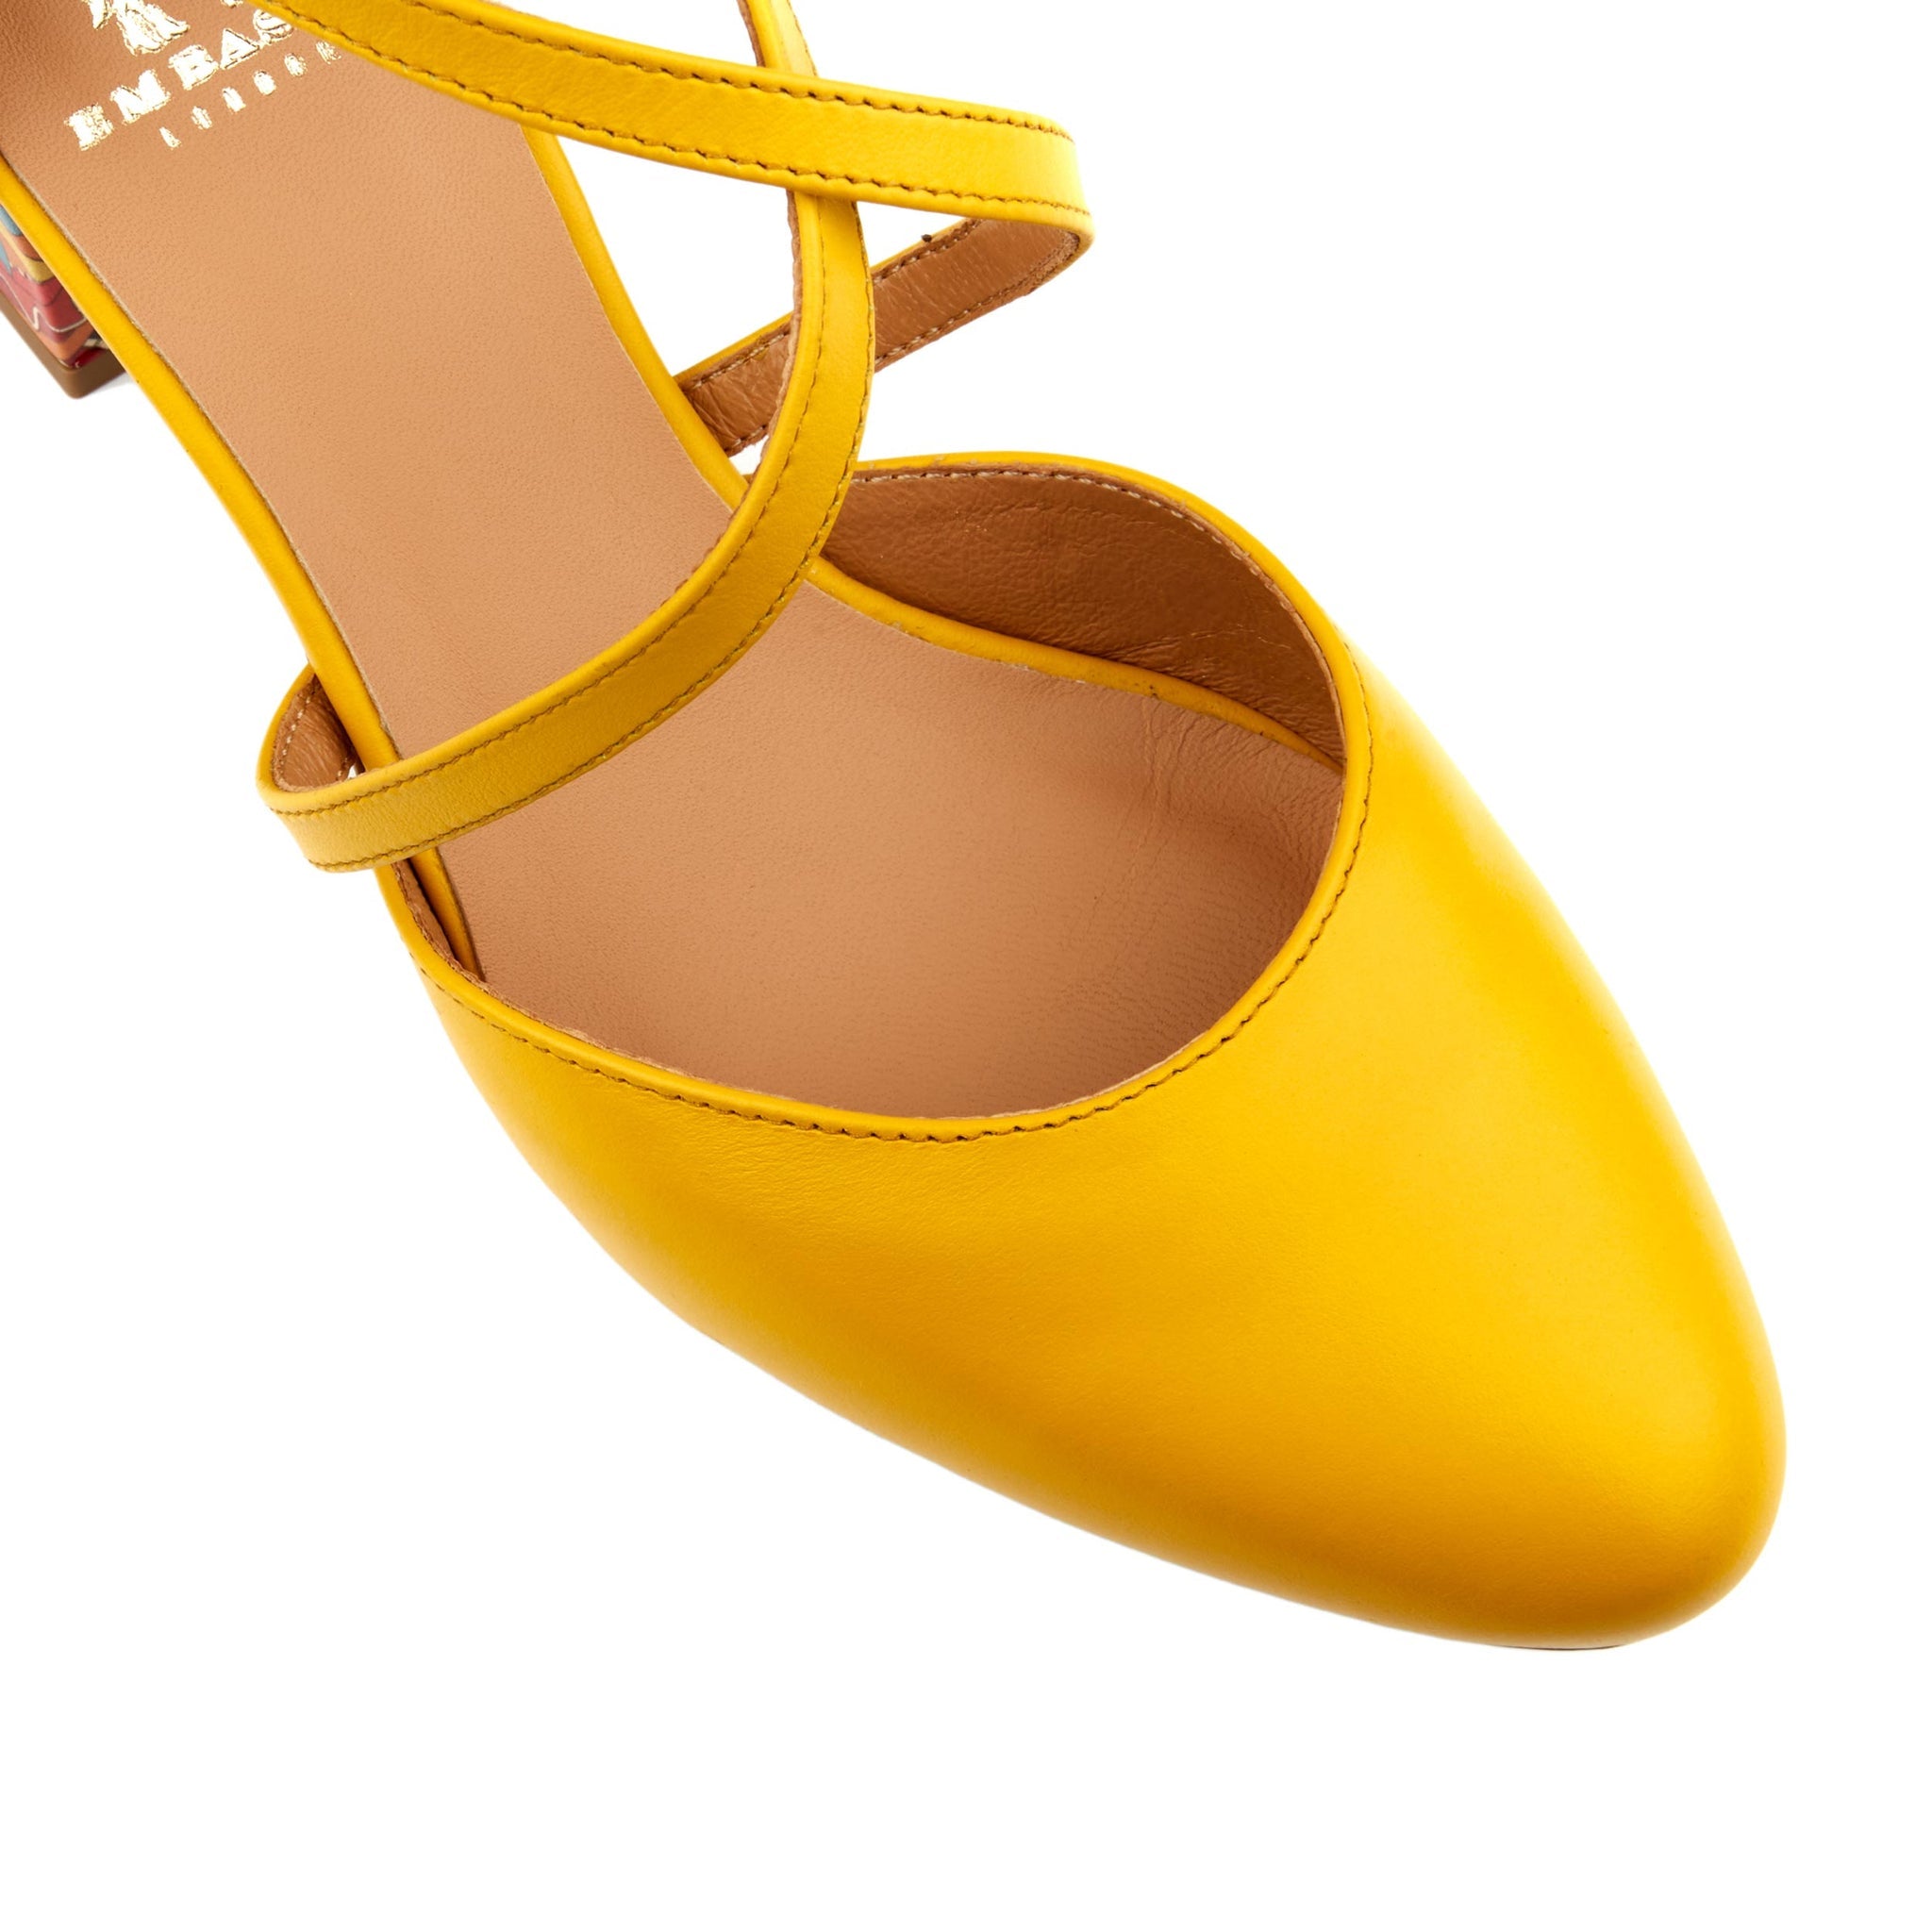 Embassy London Danni Ladies Yellow And Signature Print Leather Buckle Heels